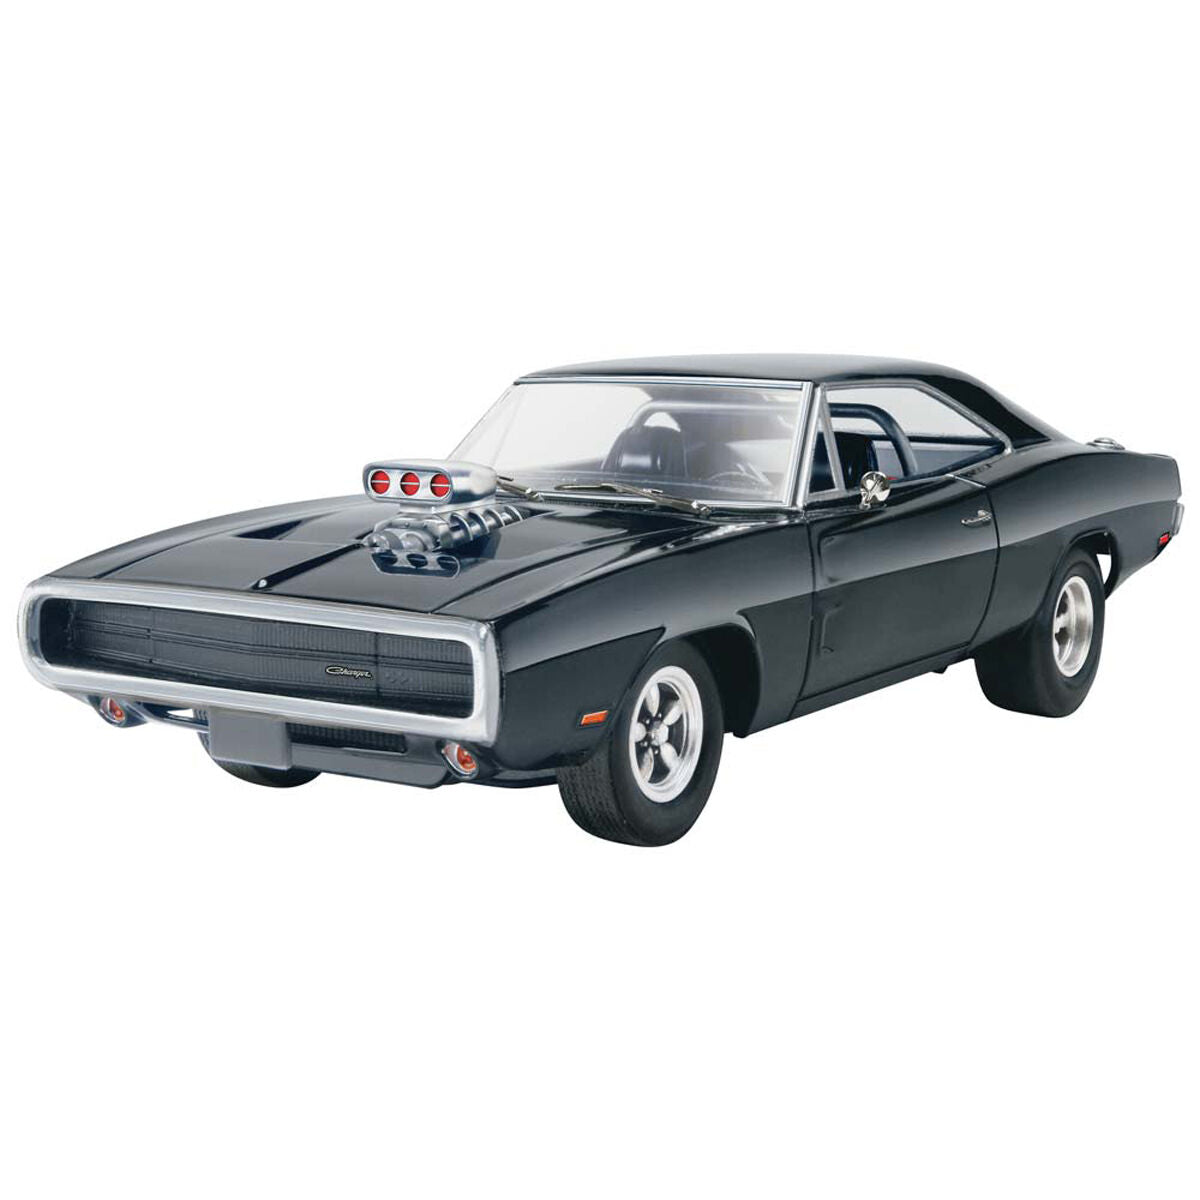 Revell Germany 1 25 Fast & Furious 1970 Dodge Charger